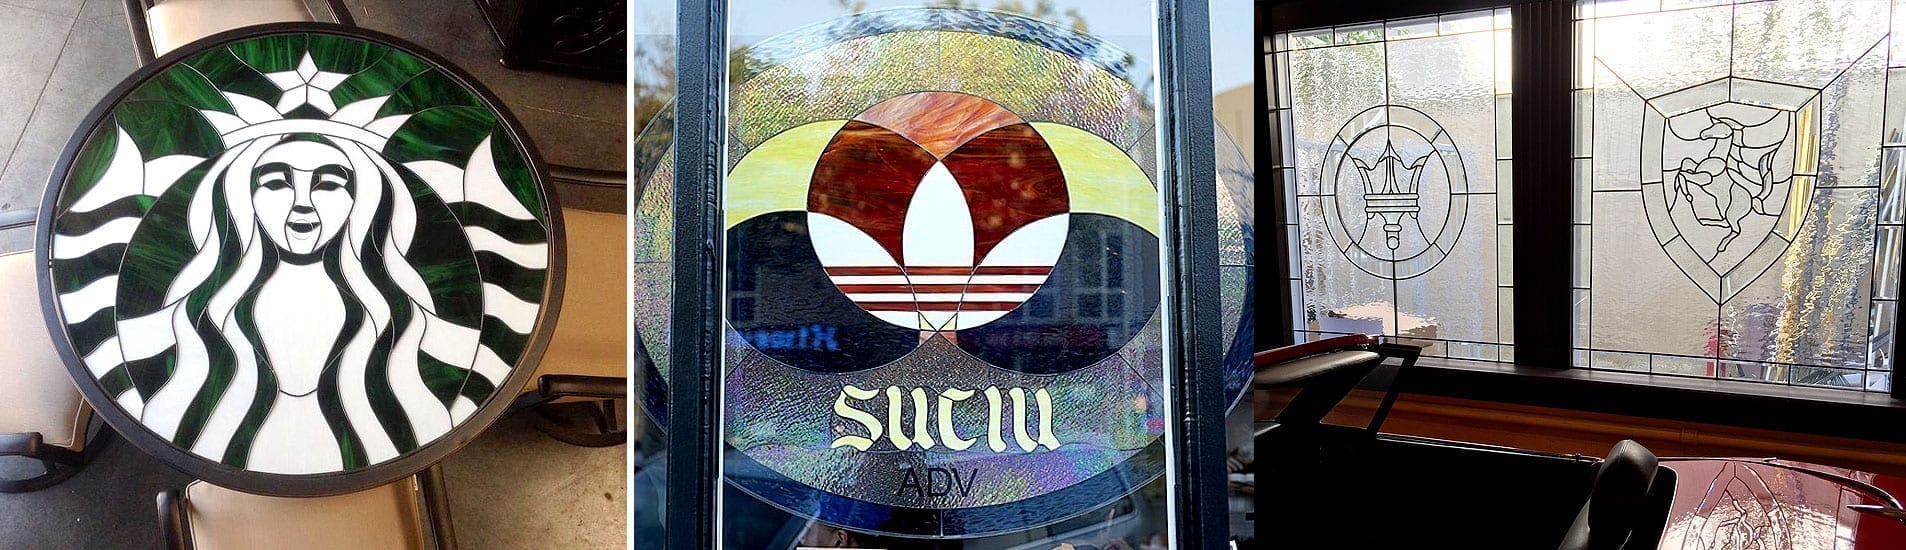 stained glass logo